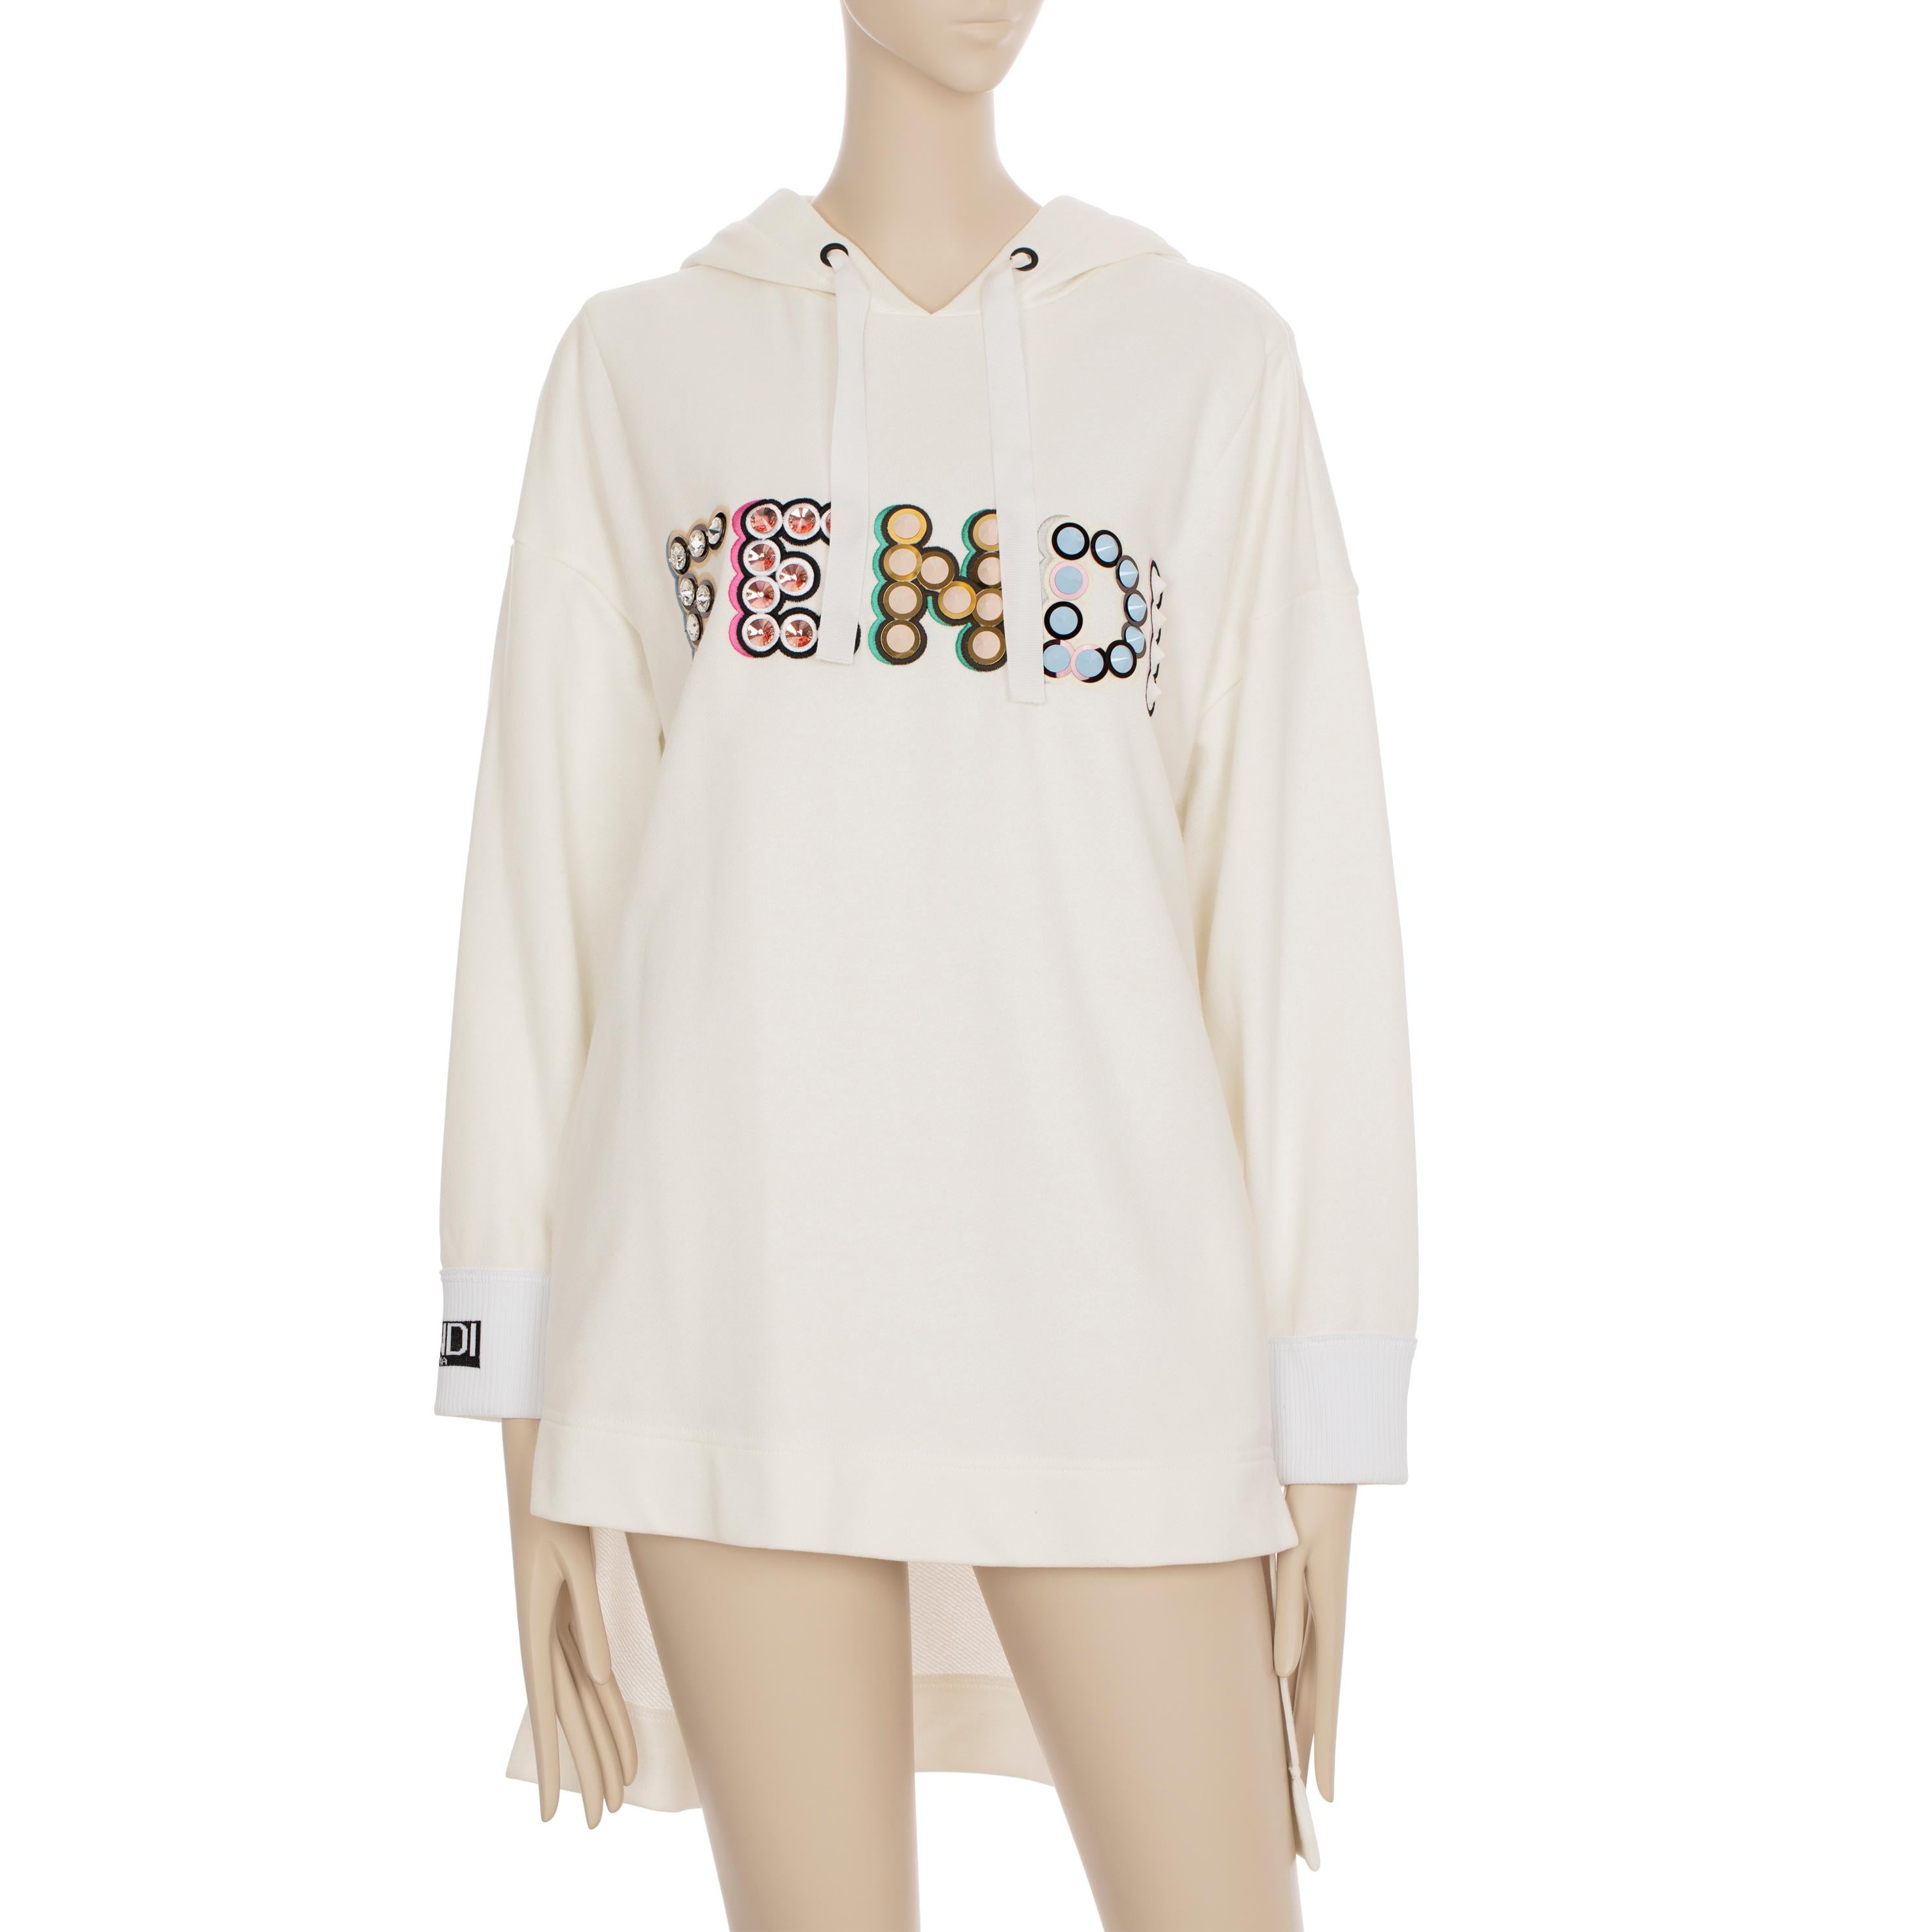 The Fendi Oversized Hooded Sweater is perfect for everyday wear. Its simple design is enhanced by subtle logo details, making it both comfortable and modern. With its oversized fit, this sweater is both effortlessly stylish and perfect for any